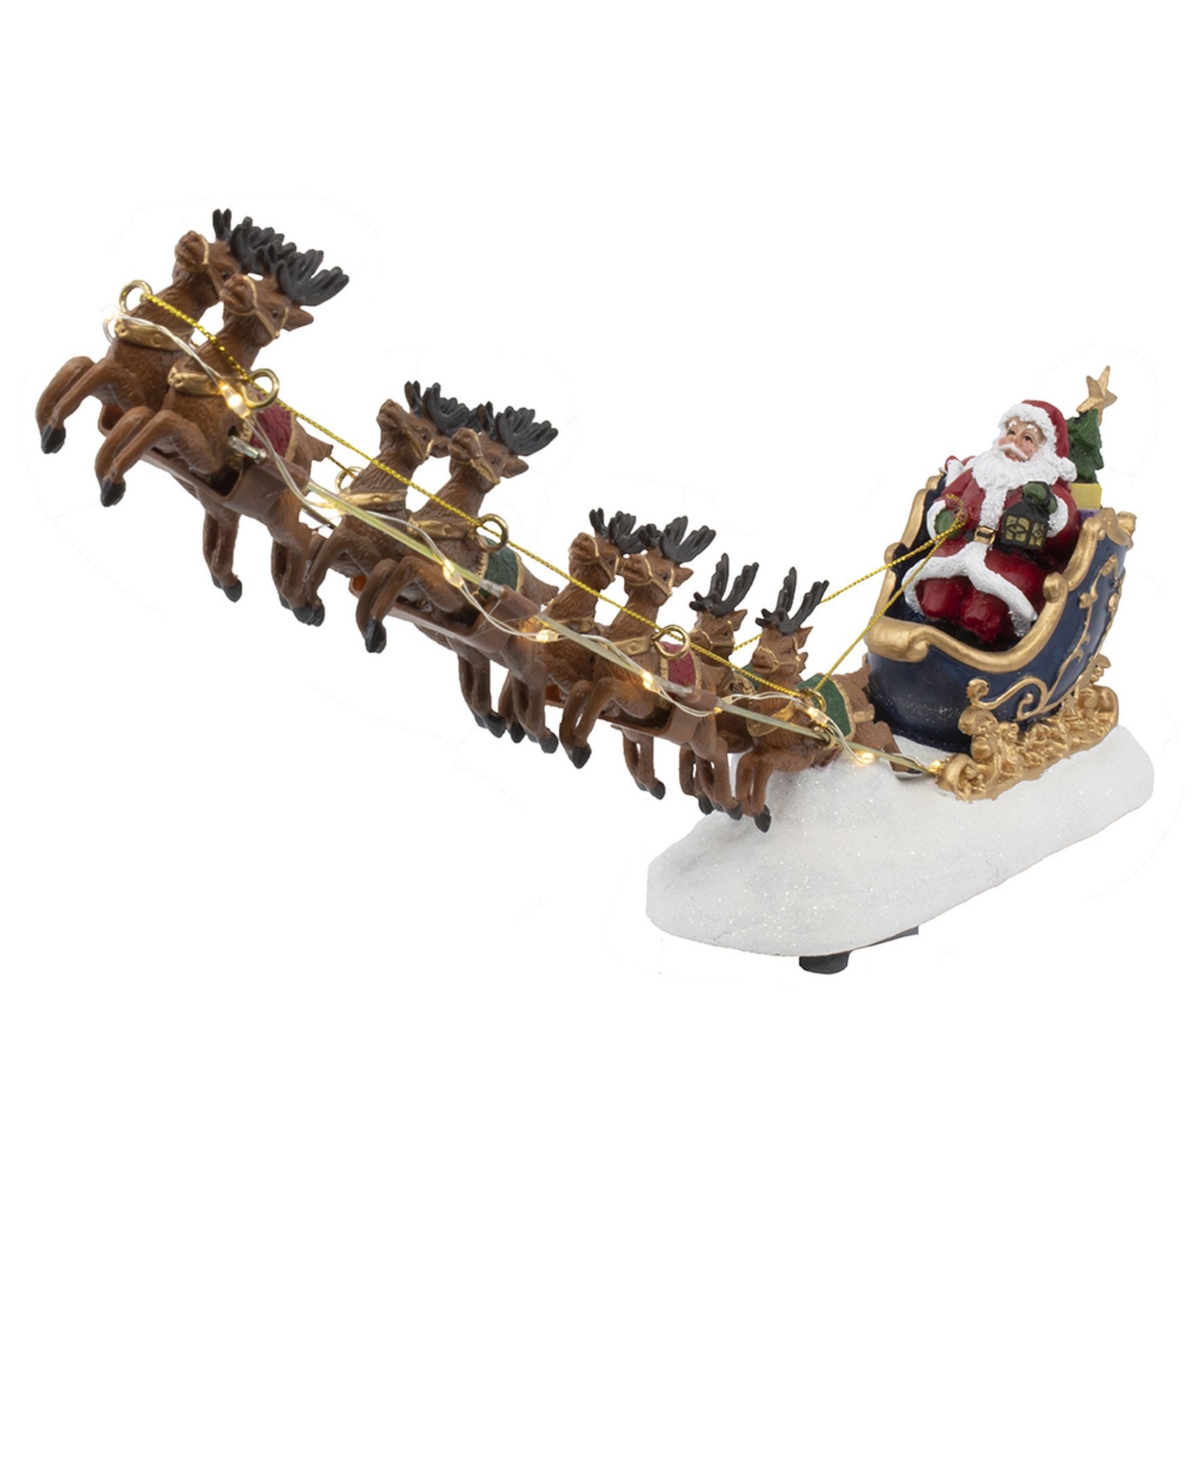 Kurt Adler 7" Battery Operated Led Santa With Sleigh Table Piece In Multicolored